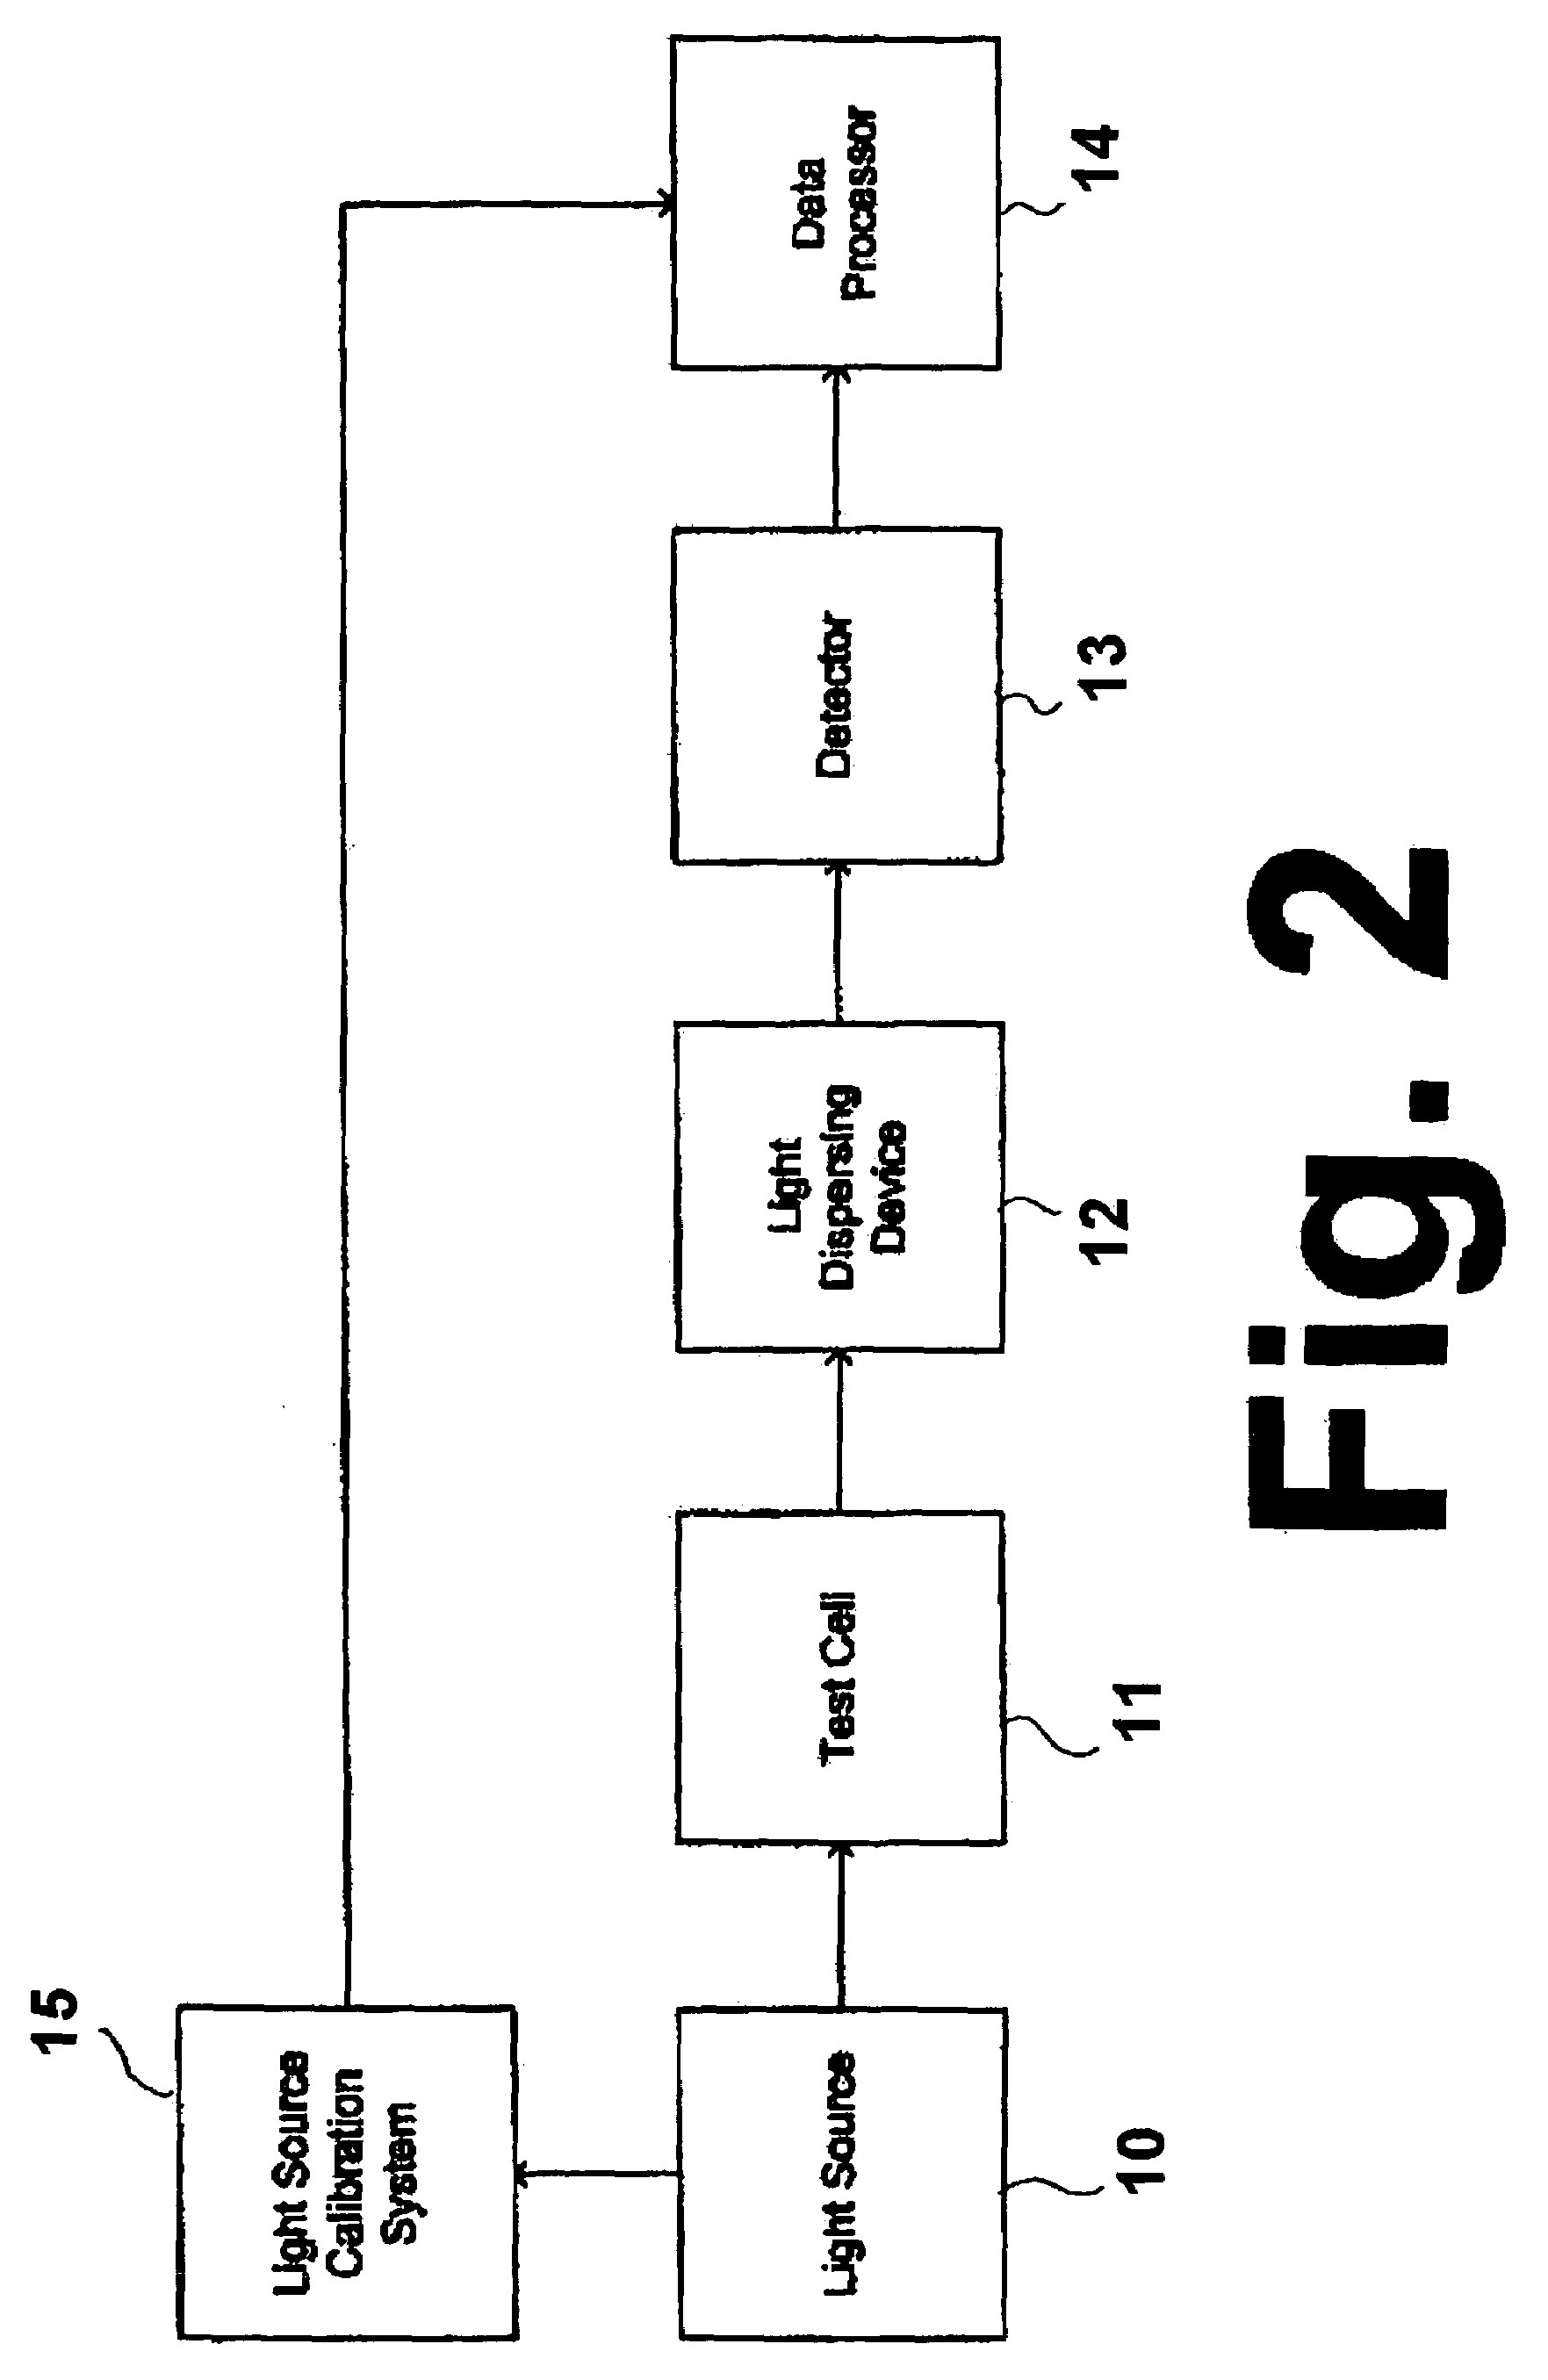 Method and apparatus for optically measuring the heating value of a multi-component fuel gas using nir absorption spectroscopy